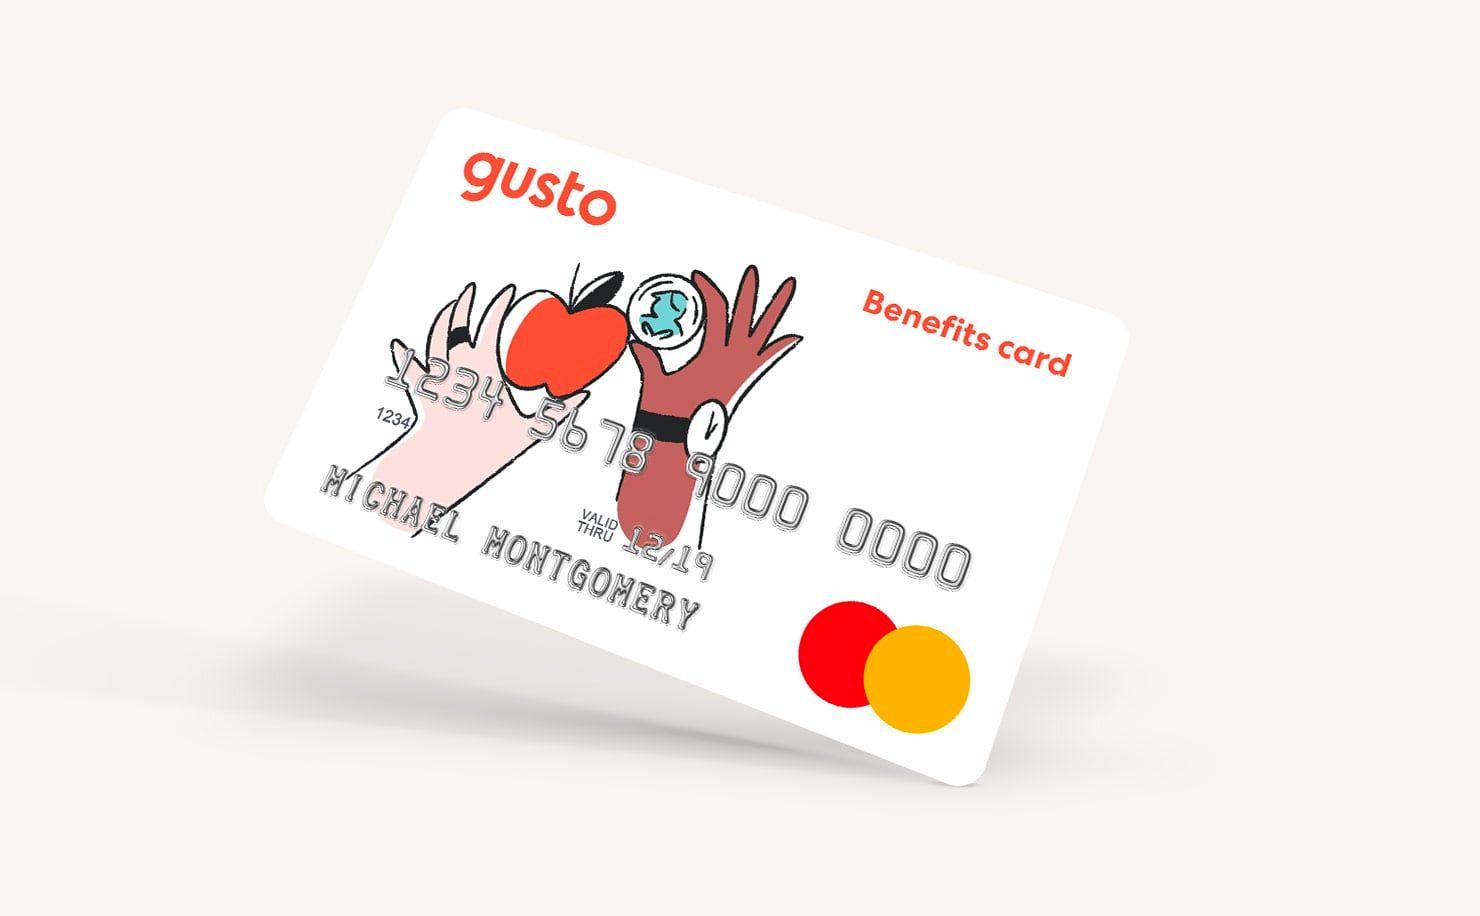 Gusto Logo - Brand New: New Logo and Identity for Gusto done In-house